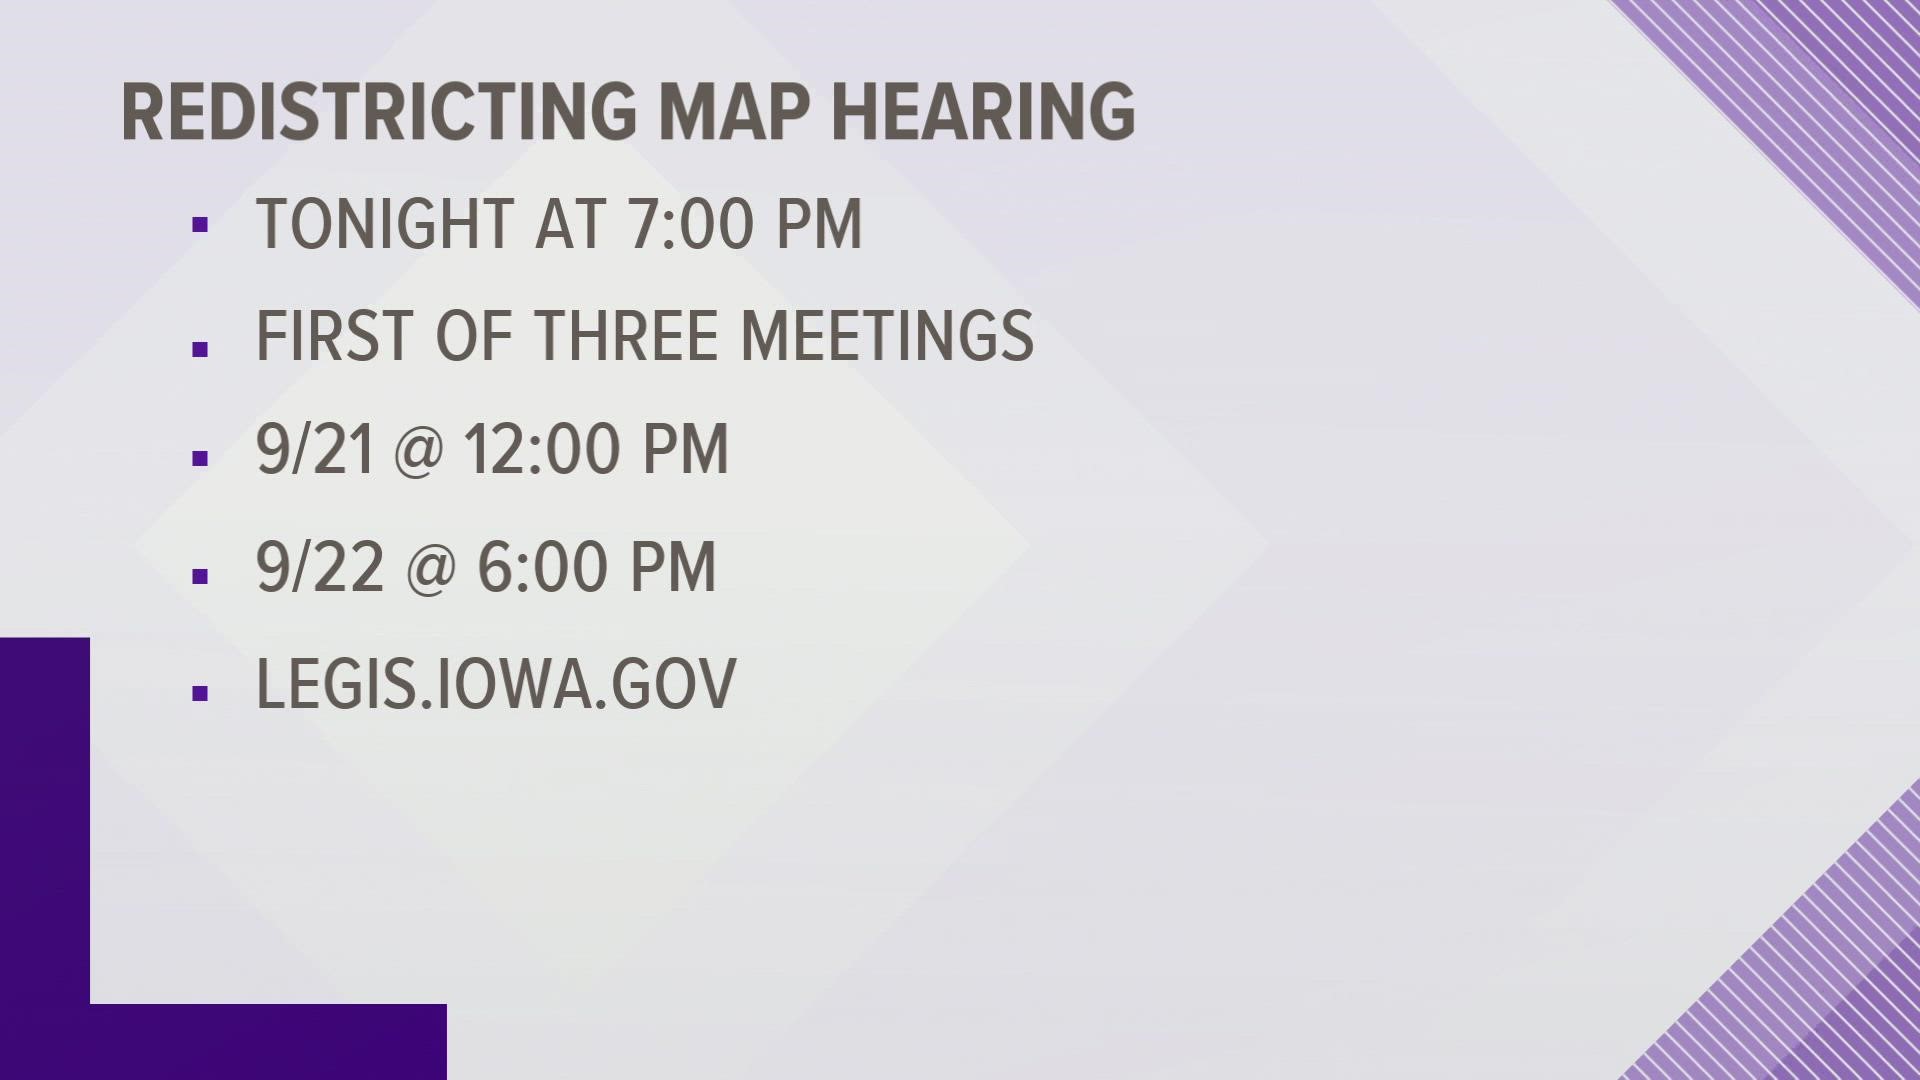 Iowans will be able to voice their opinions about the proposed redistricting maps during virtual meetings on Monday, Tuesday and Wednesday this week.